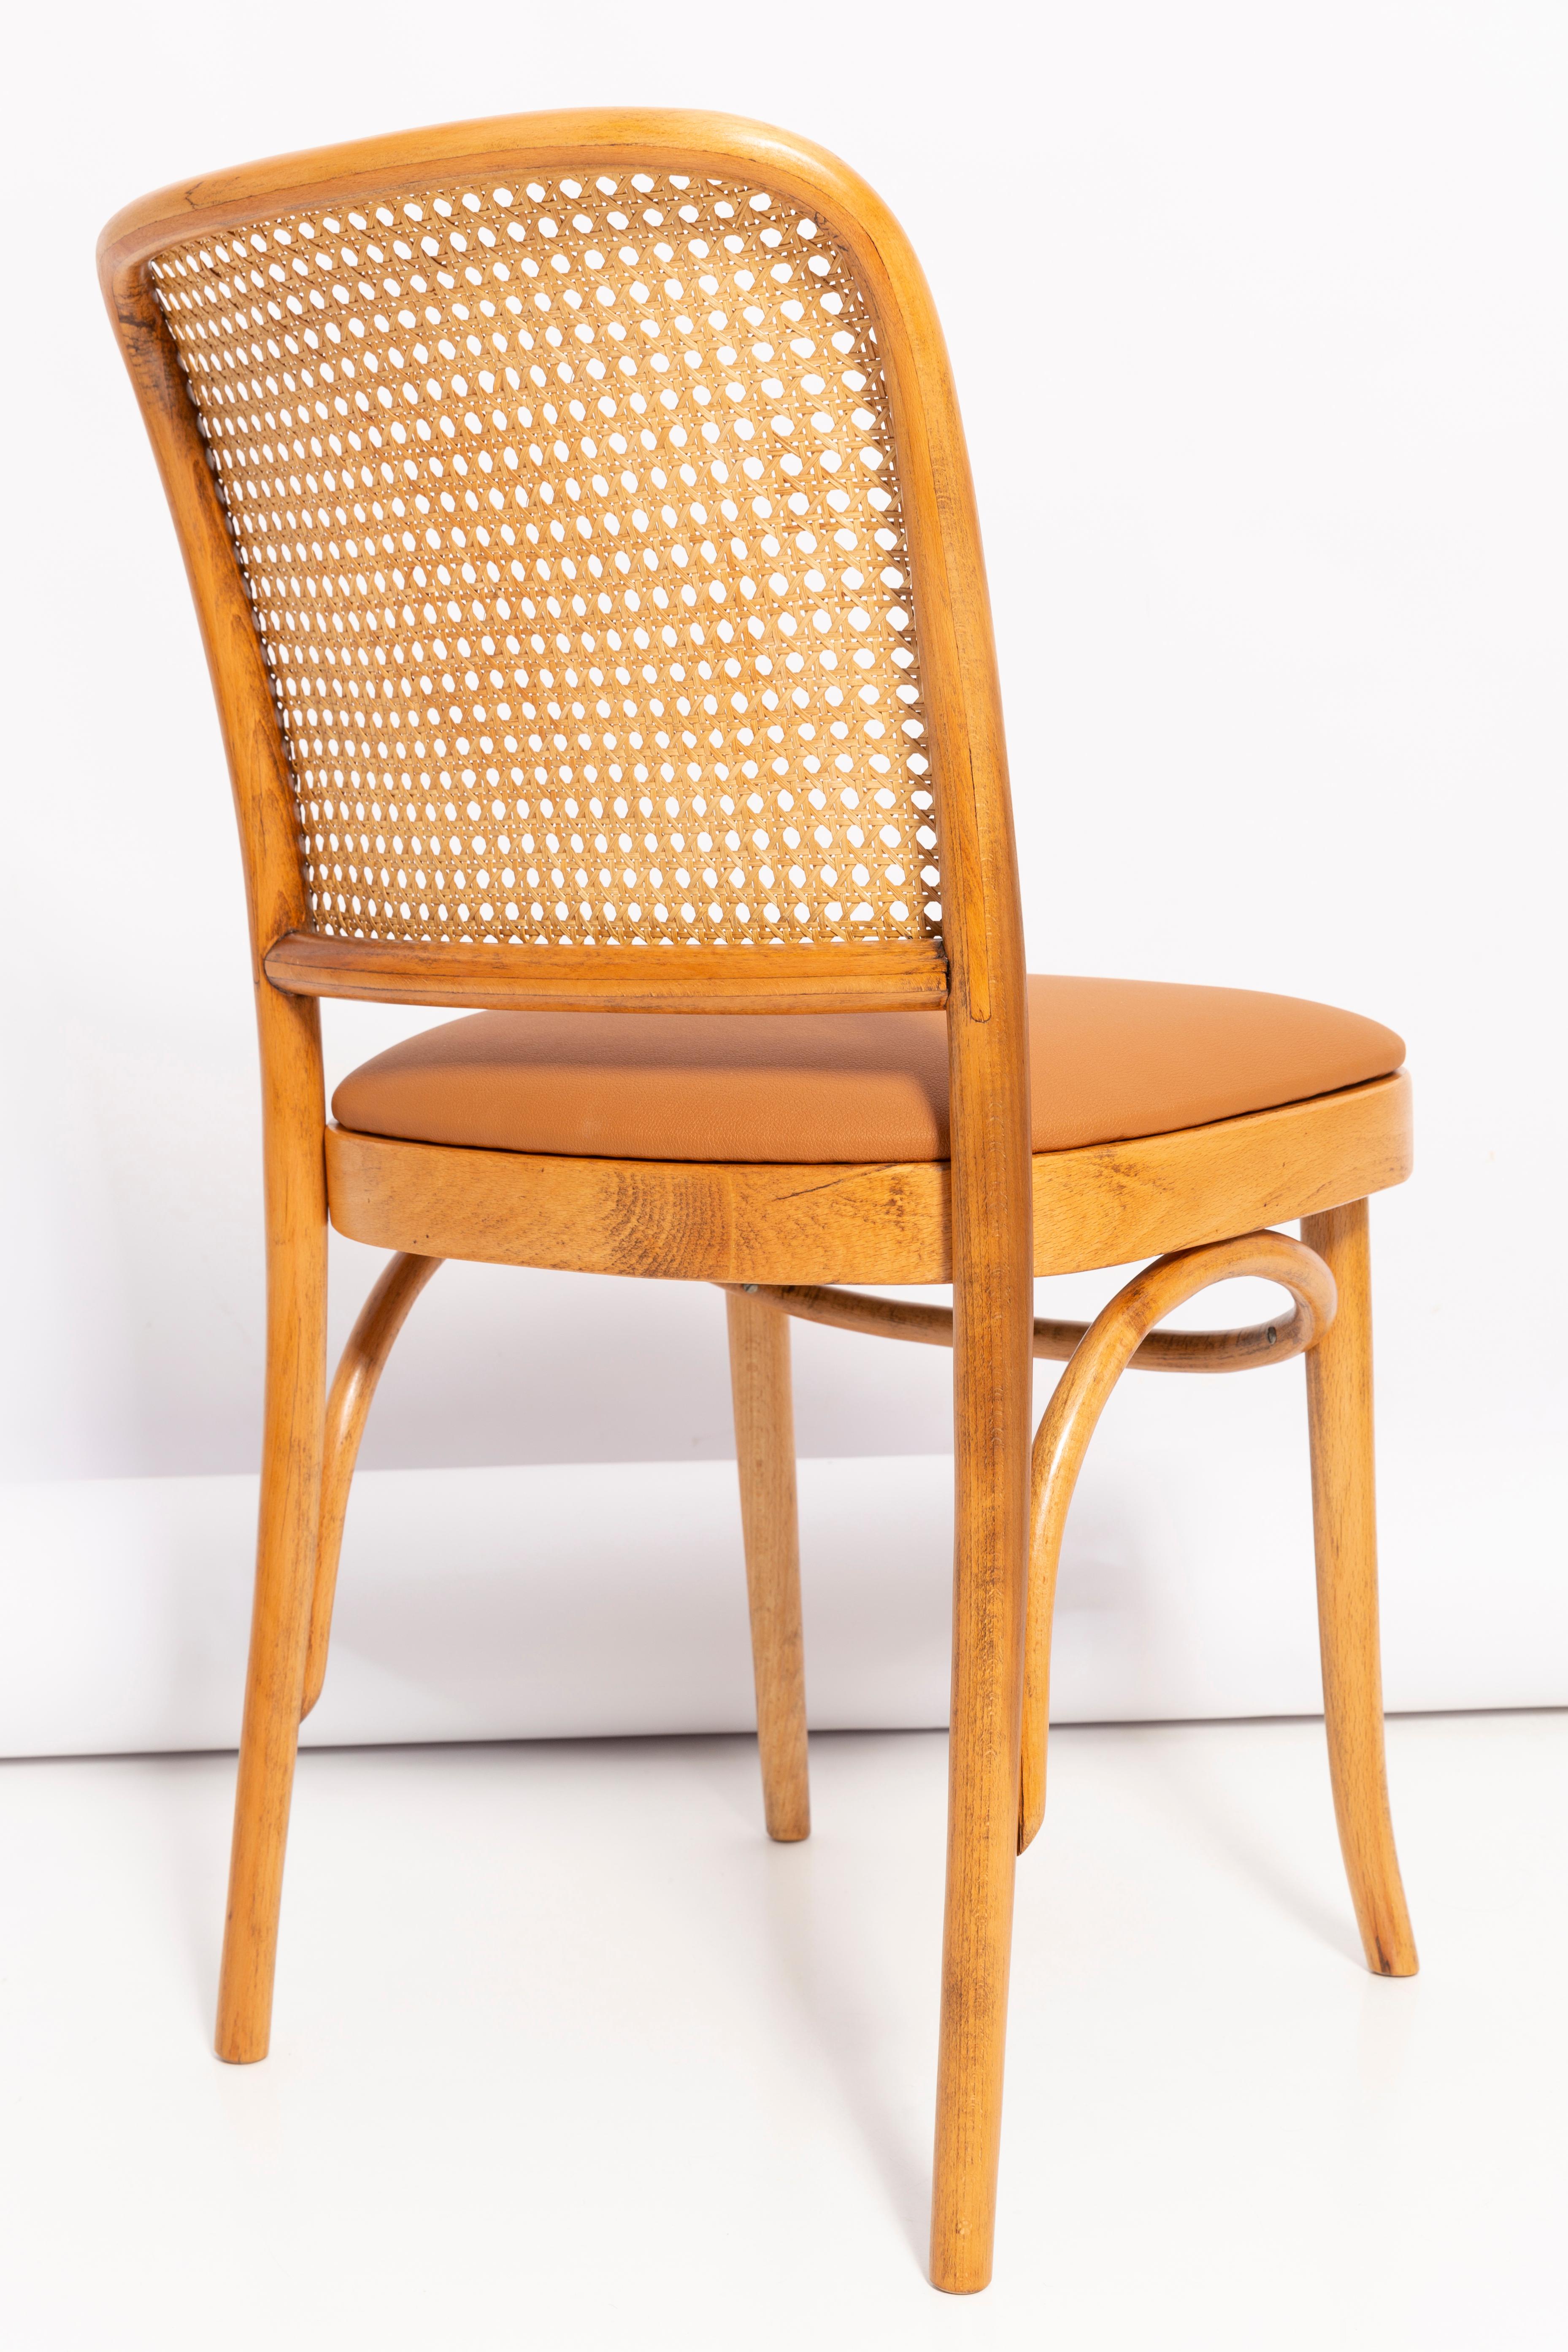 Camel Faux Leather Thonet Wood Rattan Chair, 1960s In Excellent Condition For Sale In 05-080 Hornowek, PL